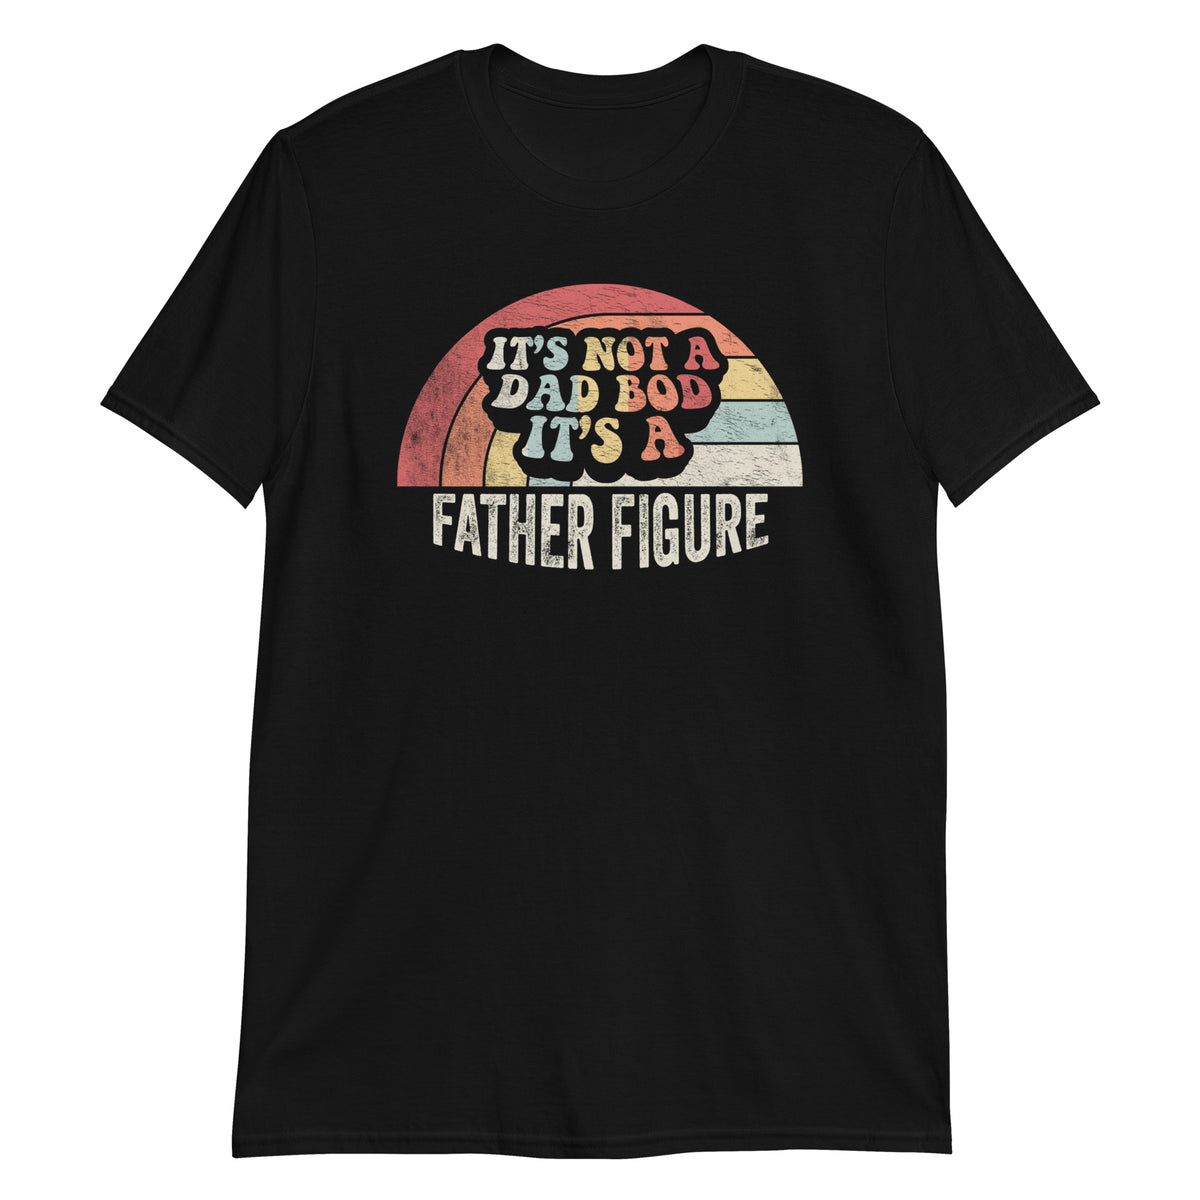 It's Not a Dad Bod it's a Father Figure T-Shirt